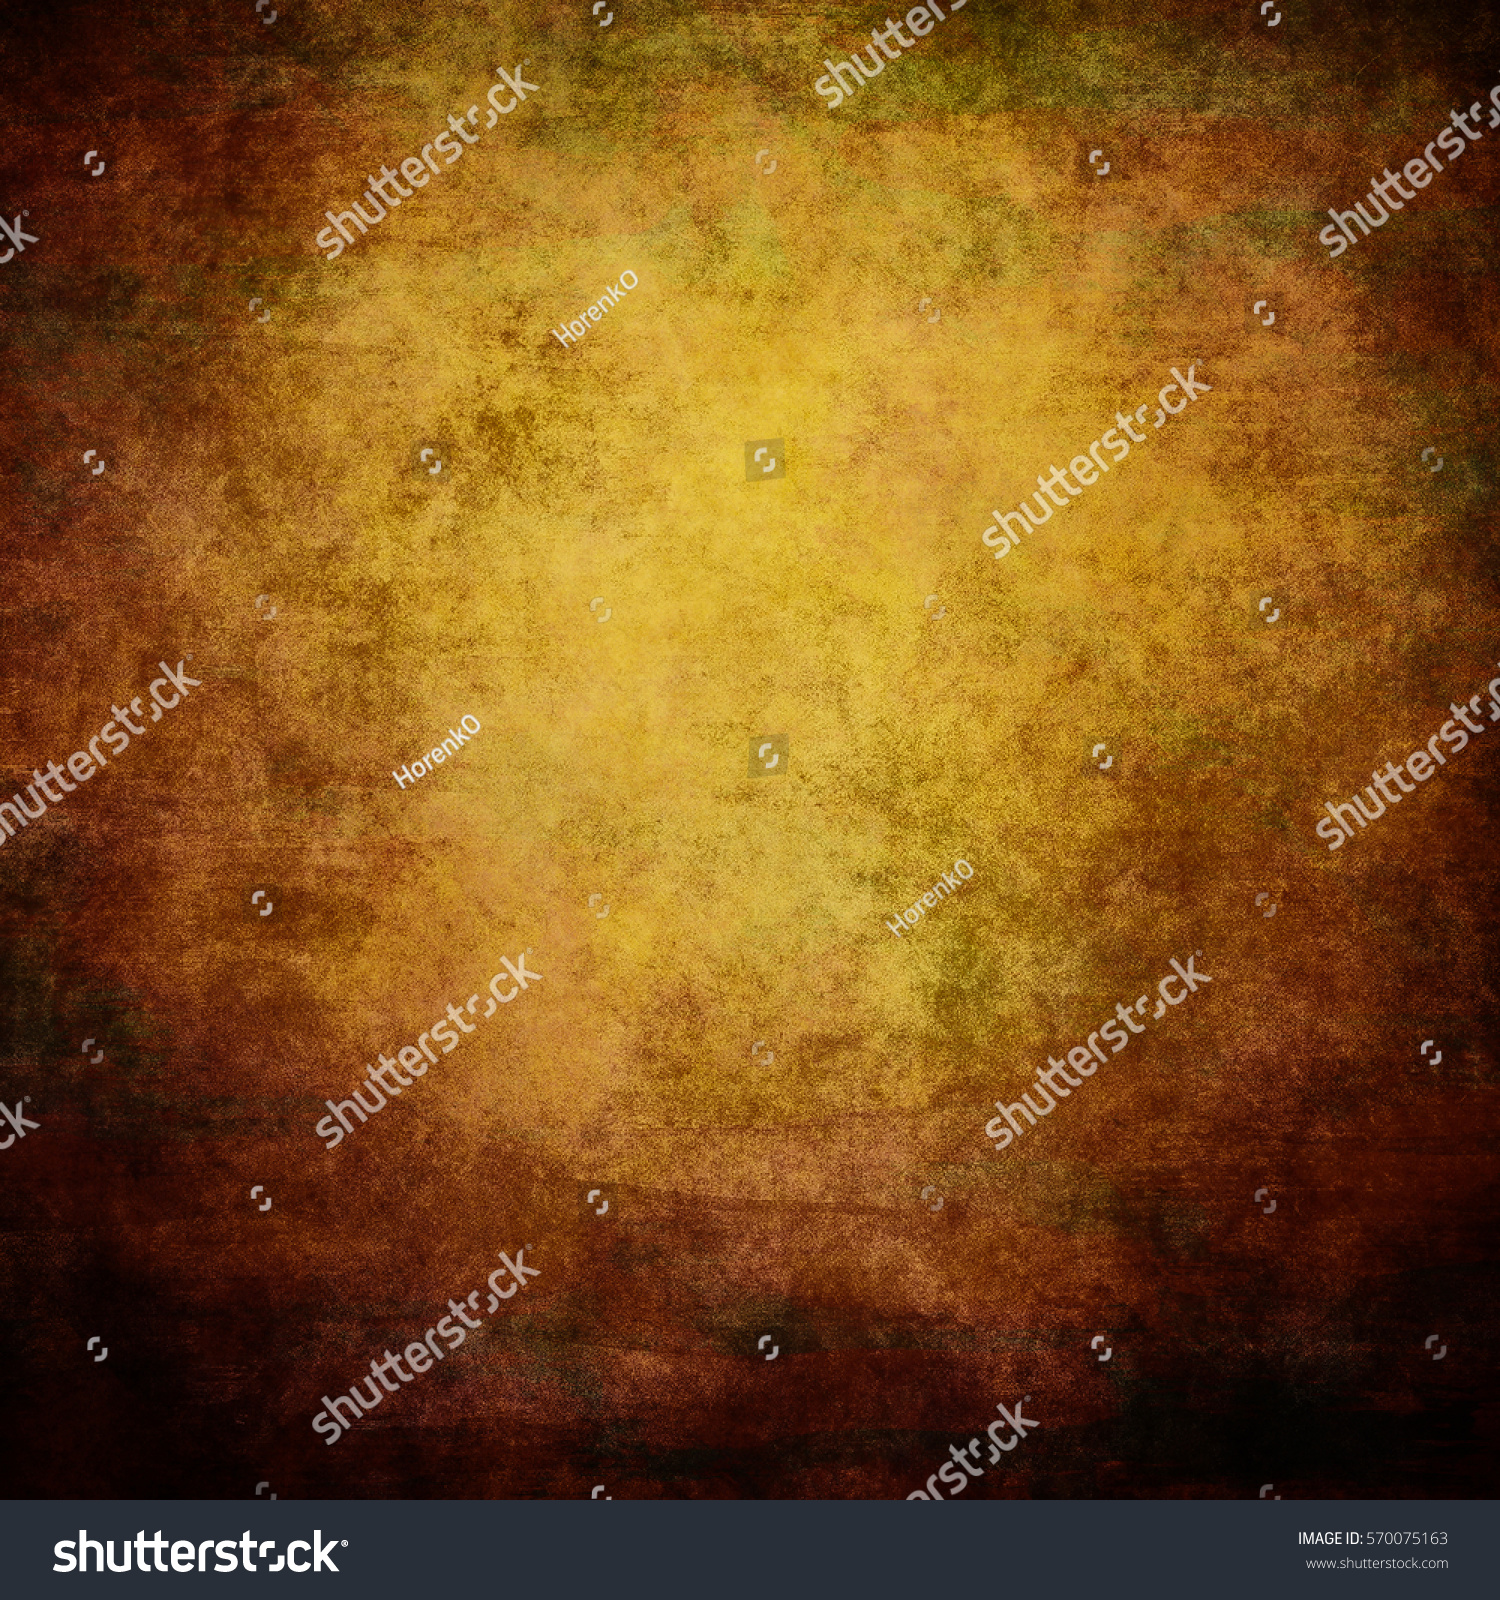 Old texture as abstract grunge background #570075163